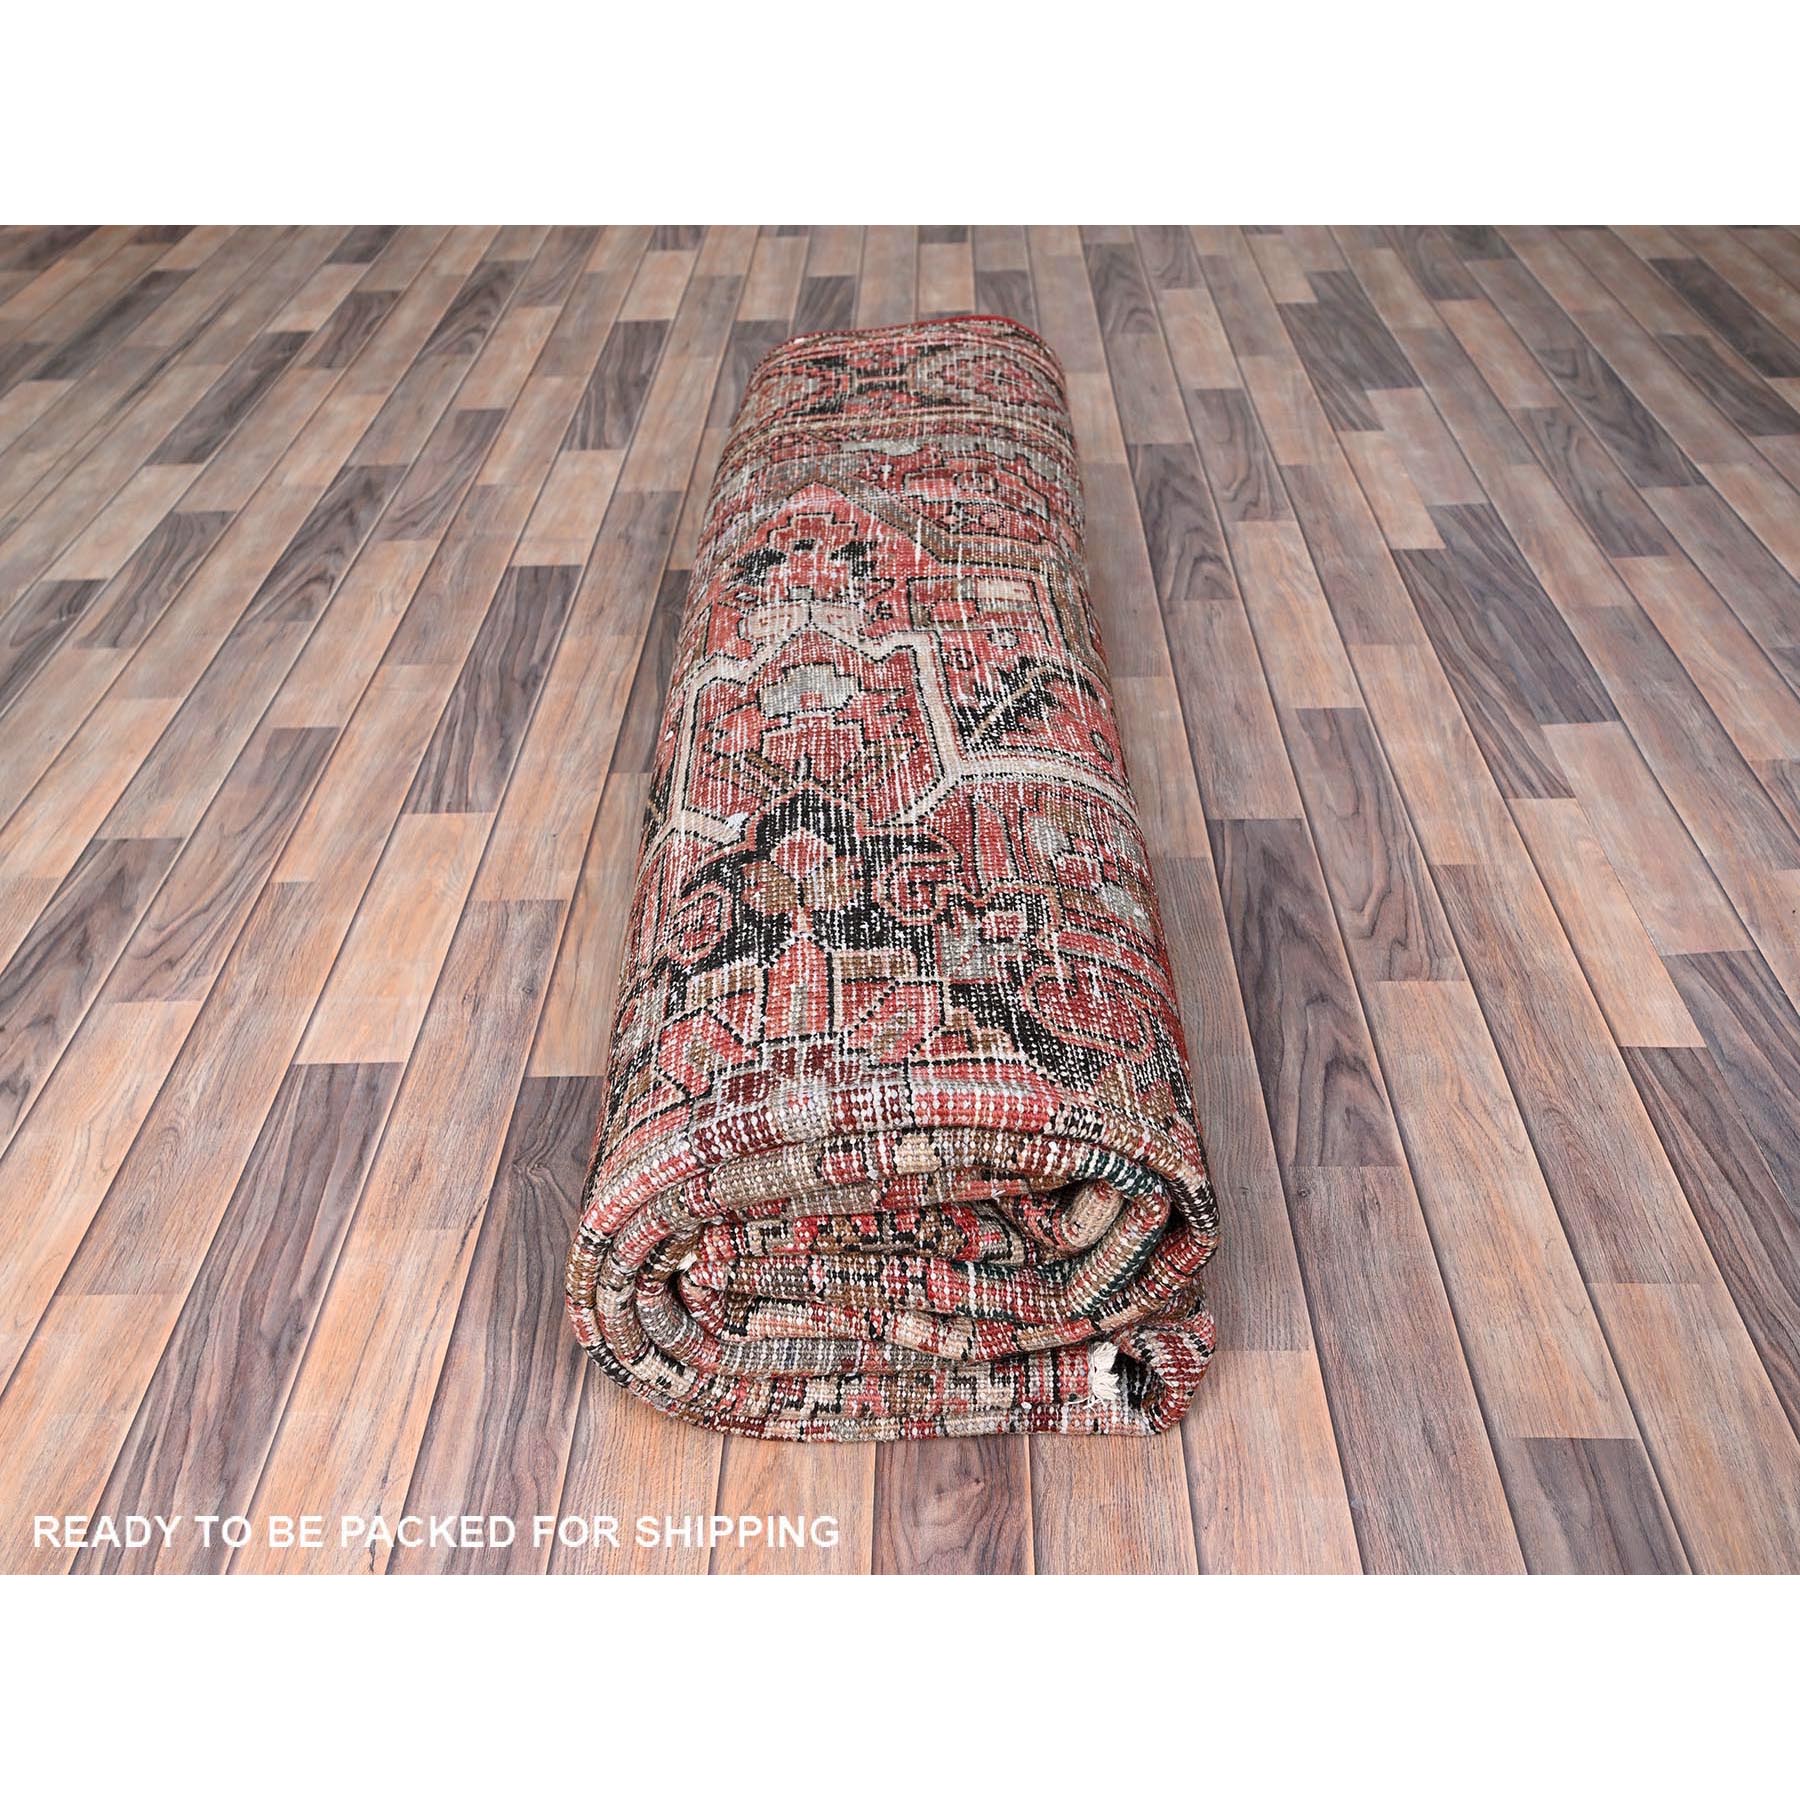 9'9"x11'7" Rust Red, Good Condition, Distressed Look, Pure Wool, Hand Woven, Semi Antique Persian Heriz, Oriental Rug 